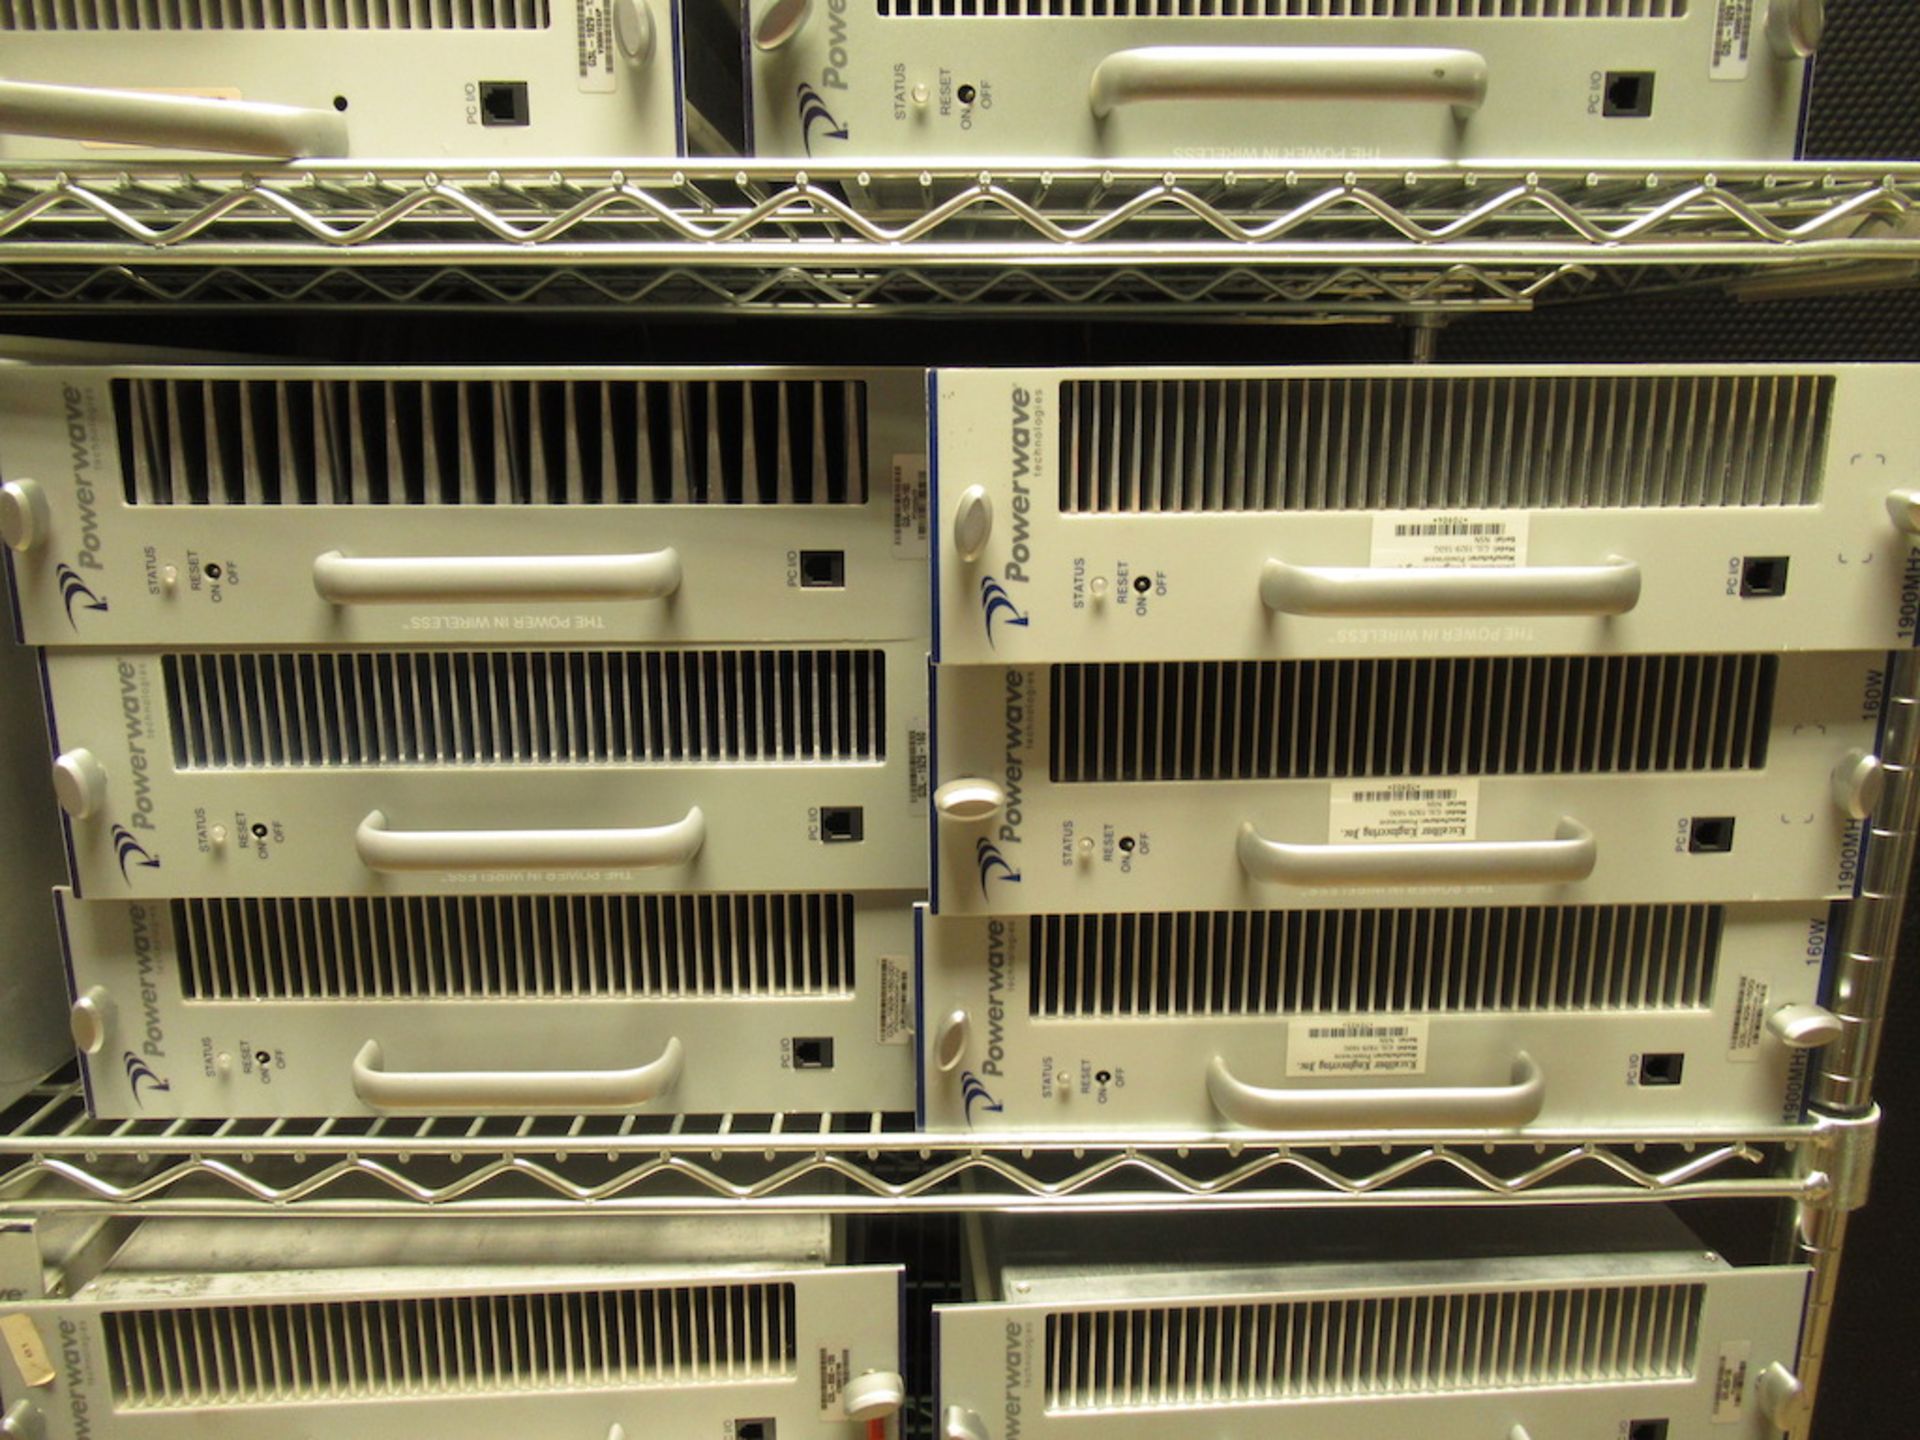 Lot to Include Entire Rack: (1) Powerwave 1 Command Combiner, (14) Powerwave G3L-1929-120, - Image 10 of 15